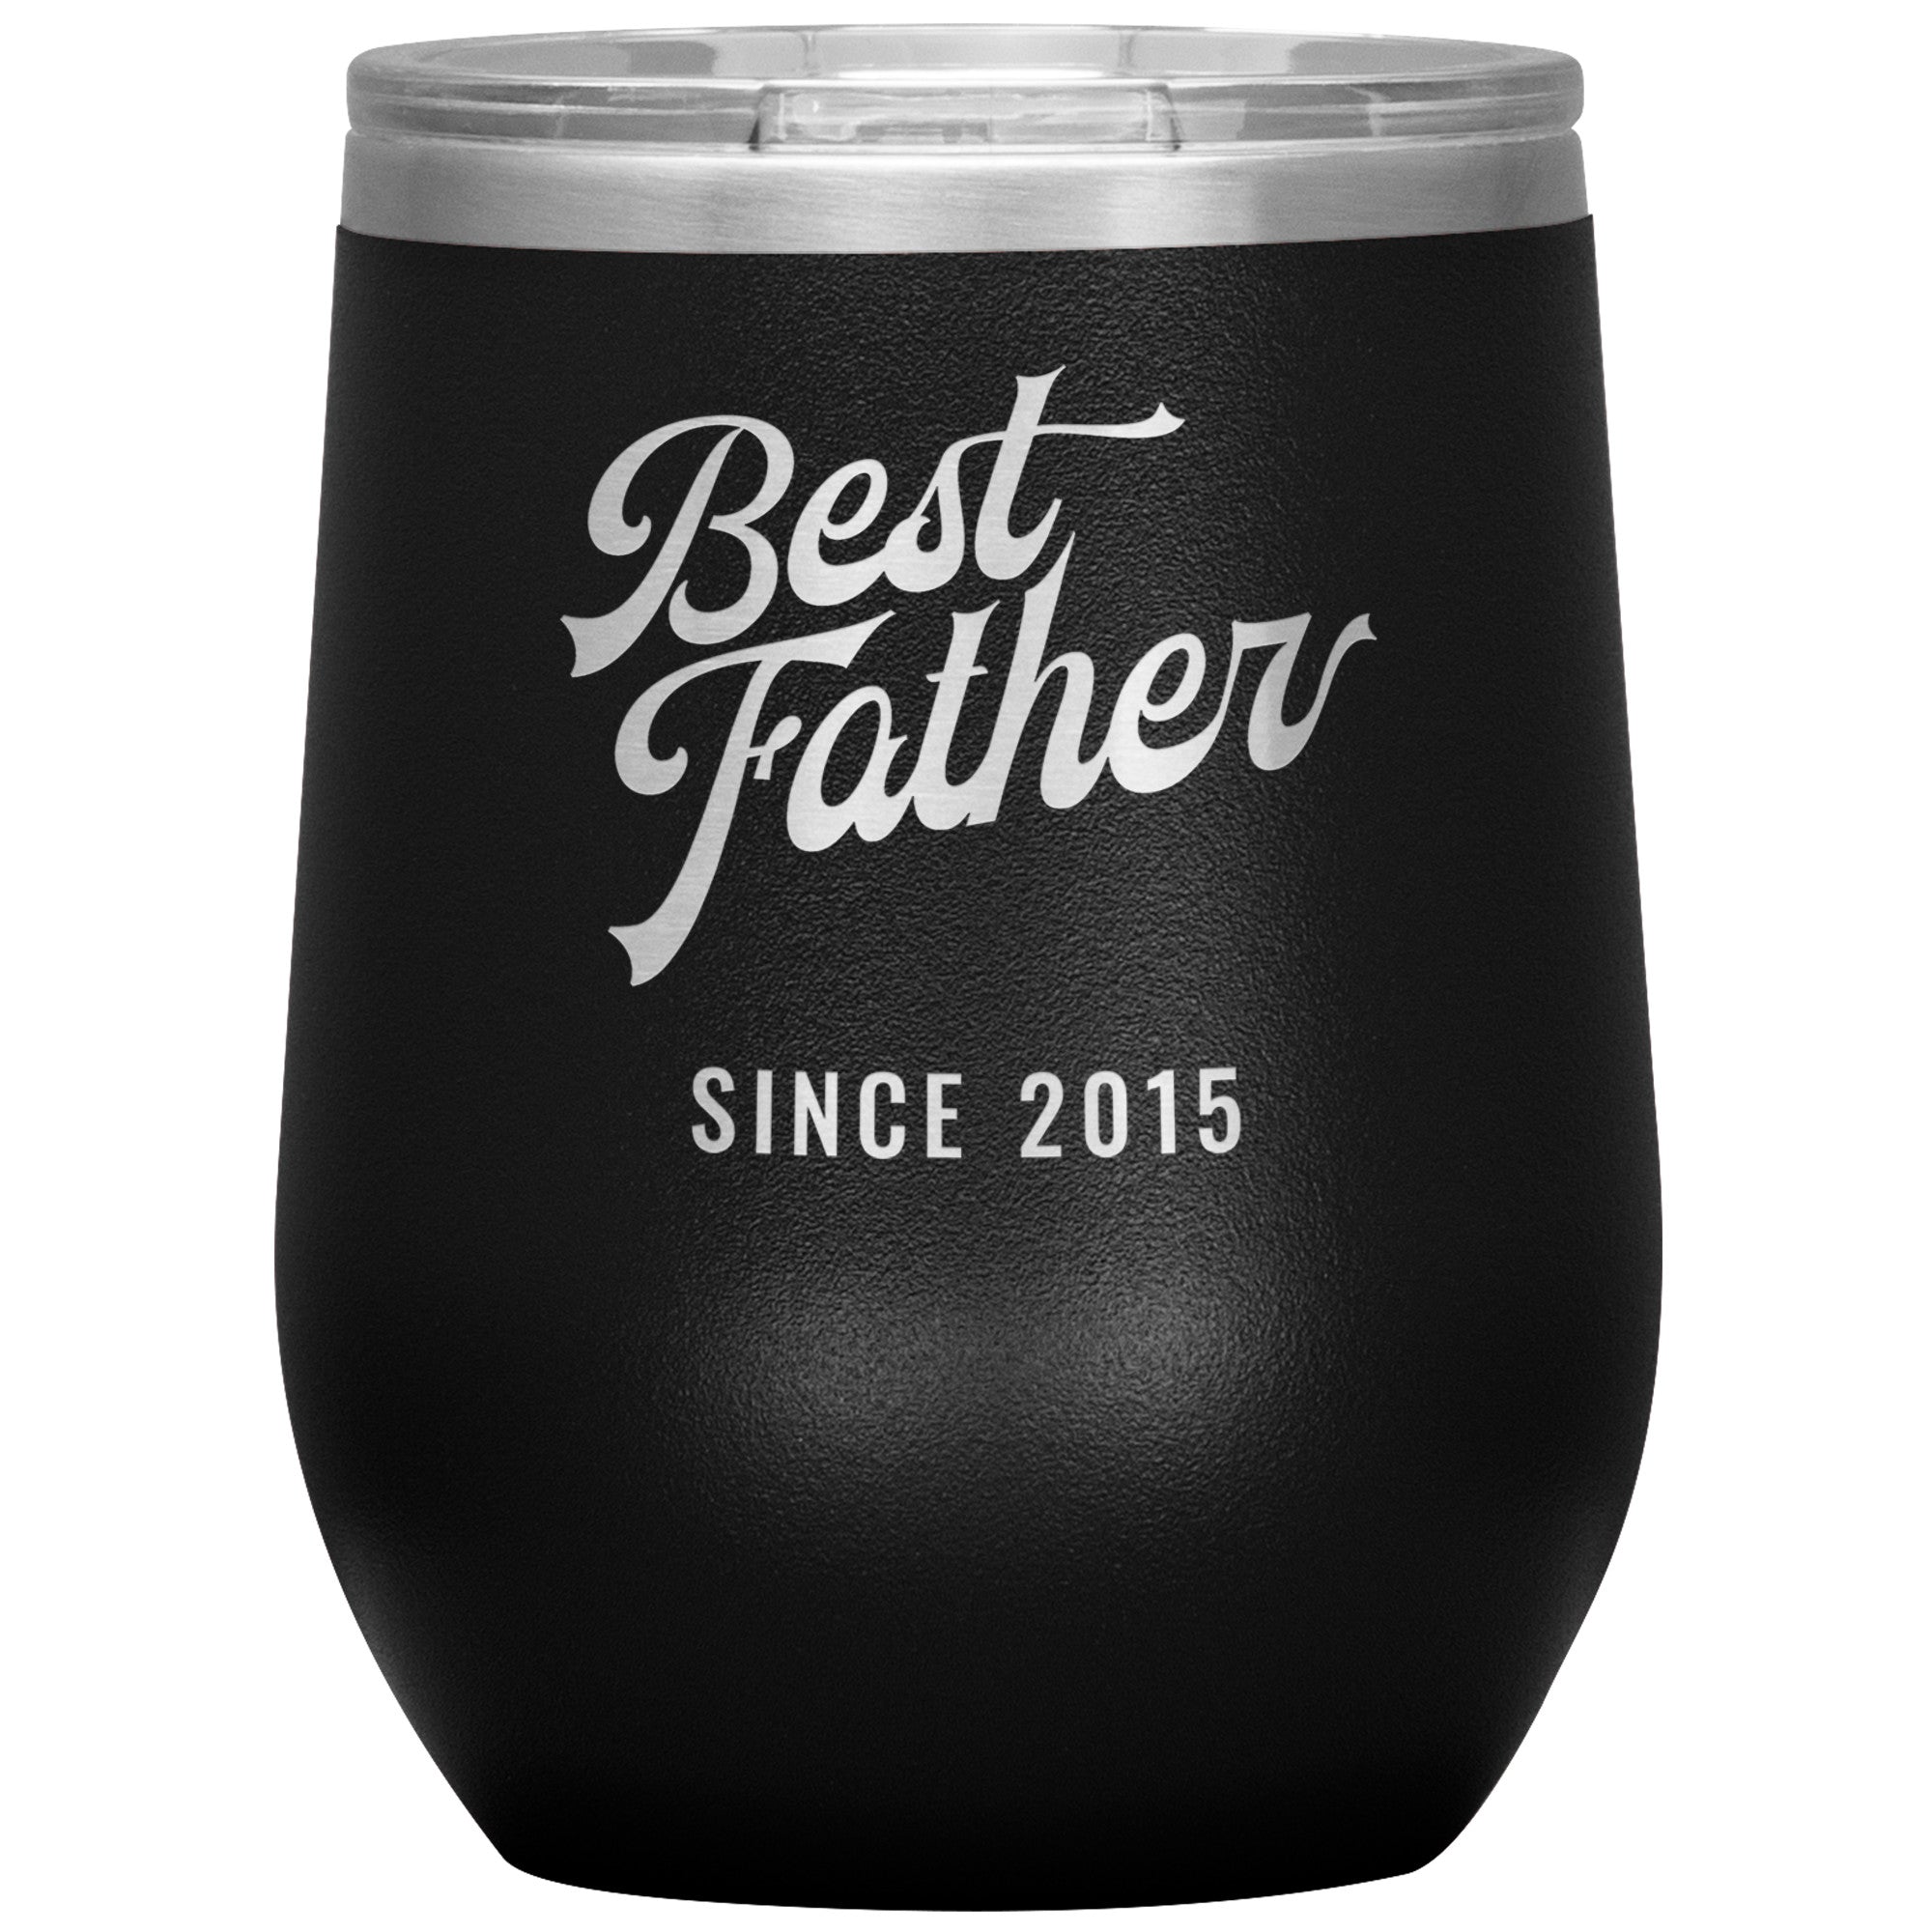 Best Father Since 2015 - 12oz Insulated Wine Tumbler